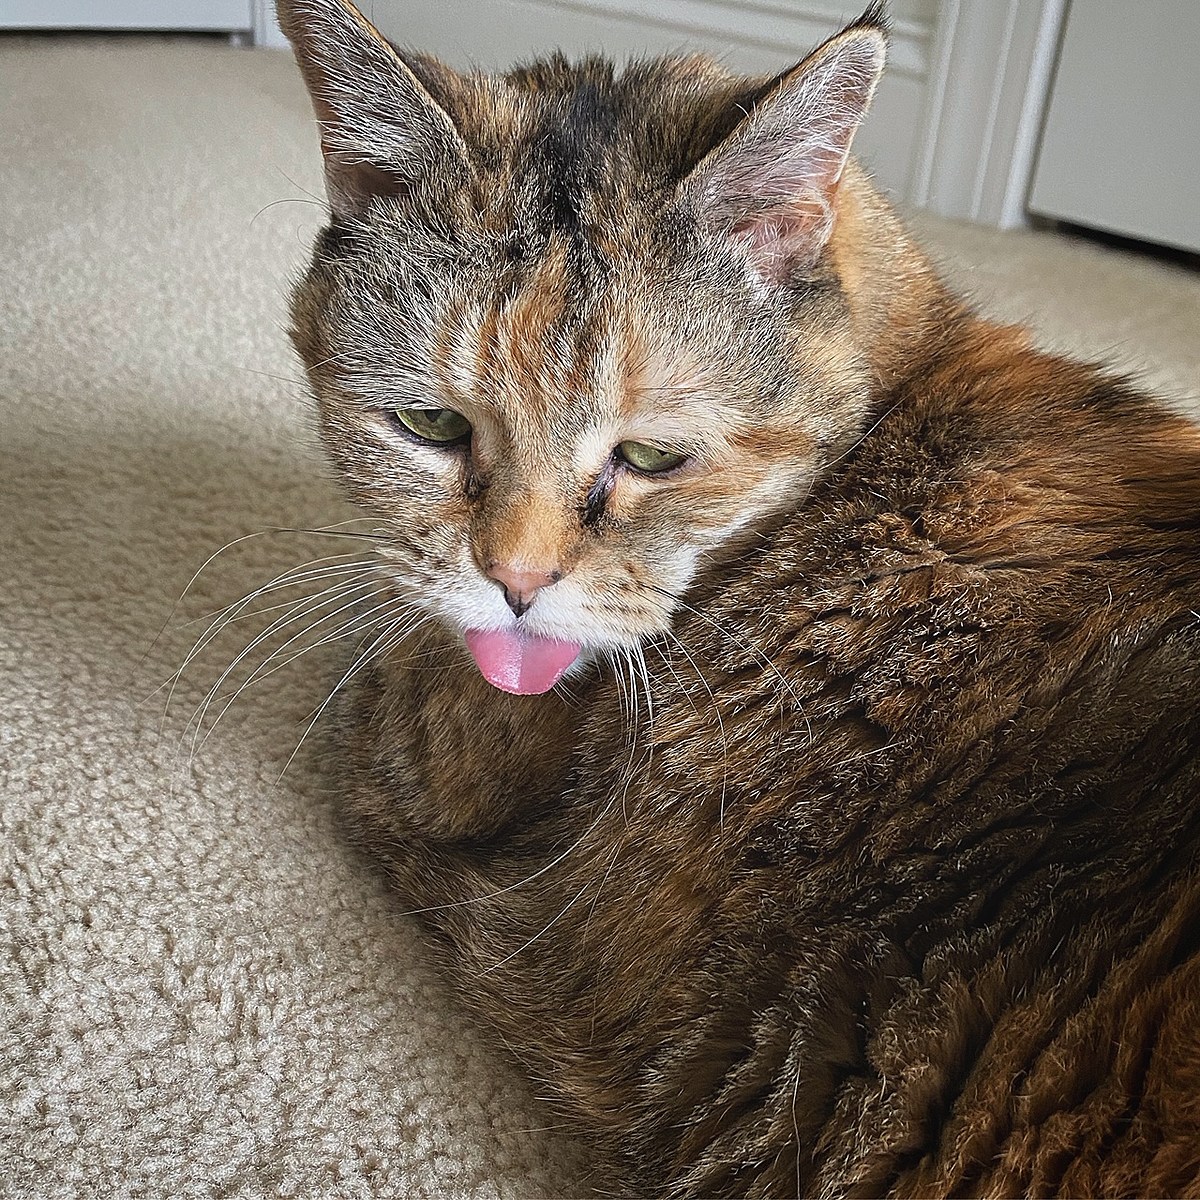 Help: What The Heck is Wrong with My Catâs Tongue?